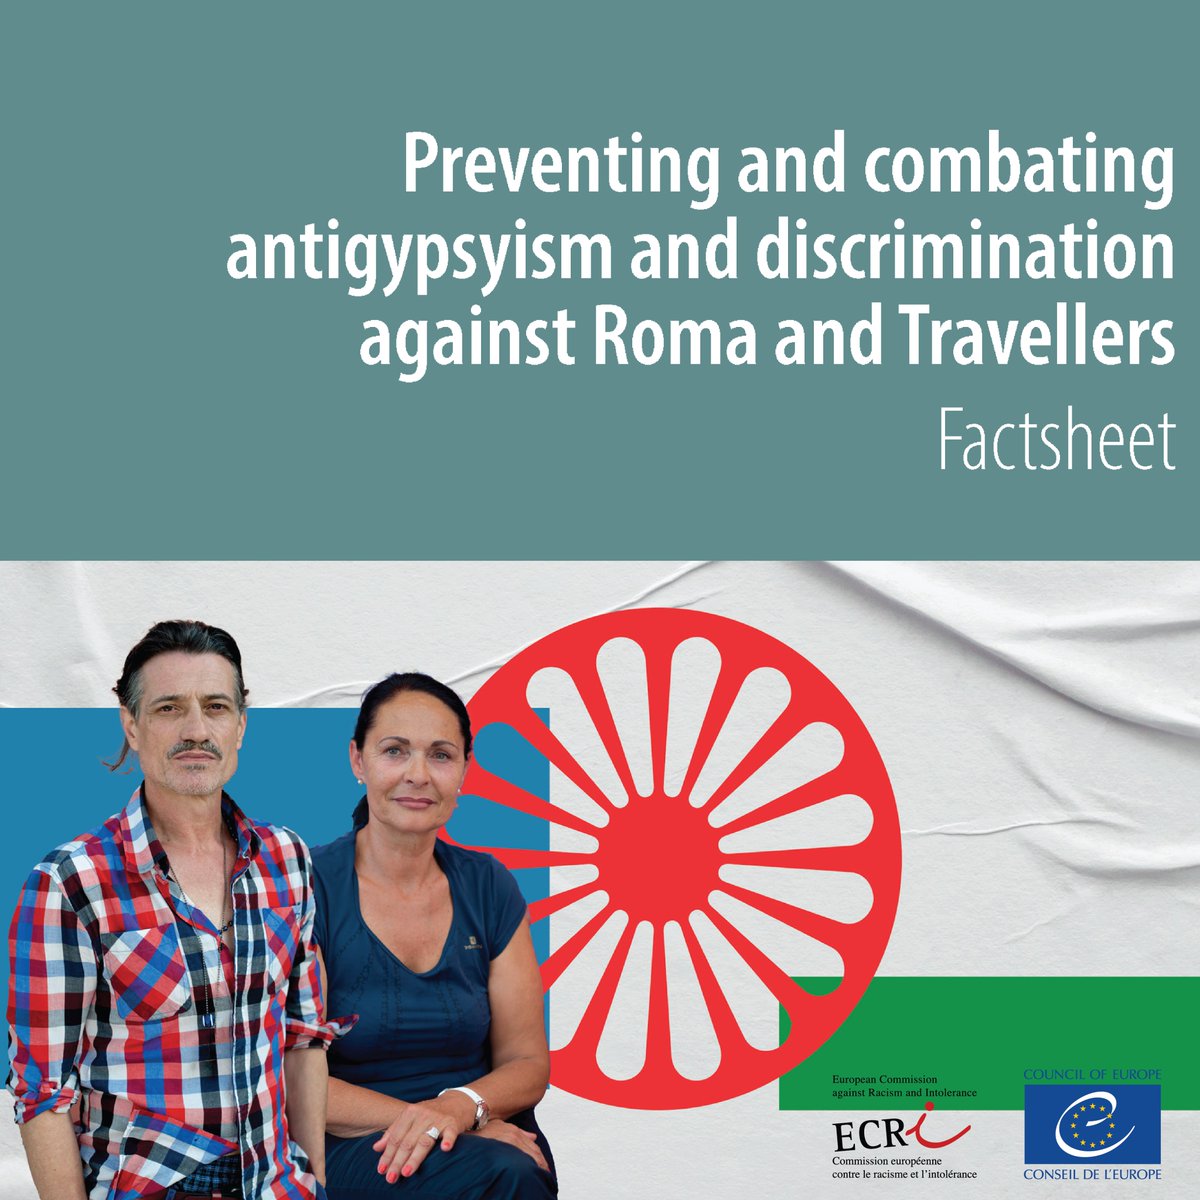 📢On #InternationalRomaDay, let's reaffirm our commitment to ending #antigypsyism & discrimination against Roma and Travellers. Check out key recommendations on combating these scourges in #ECRI GPR13 and the factsheet.📘➡️ bit.ly/4ai0Lwv & bit.ly/3VJJB6e